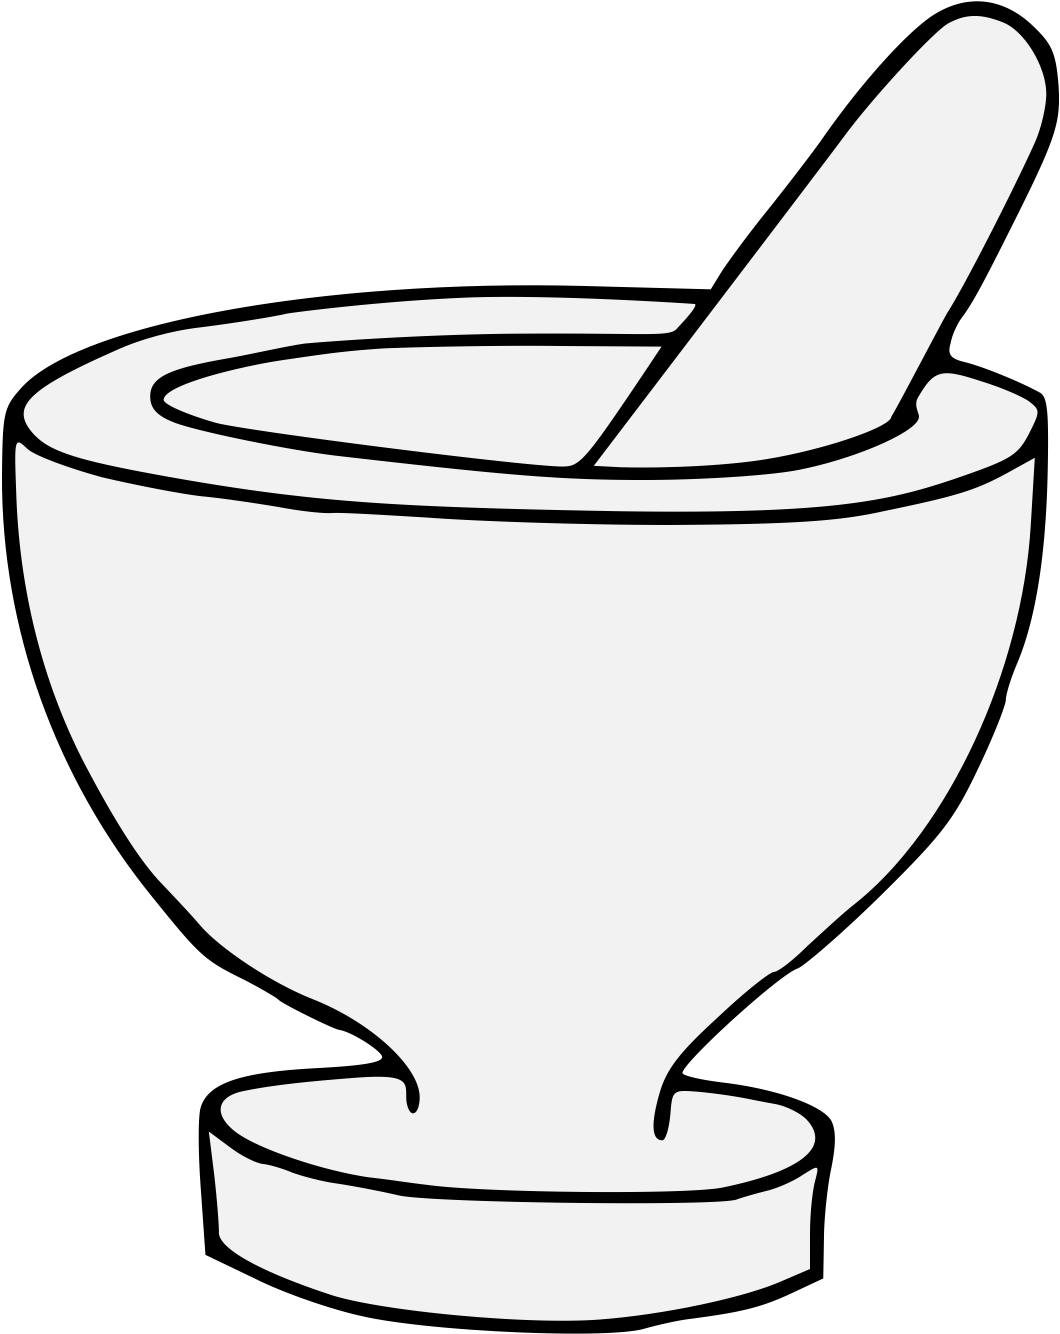 Mortar And Pestle - Art - (1107x1351) Png Clipart Download. 